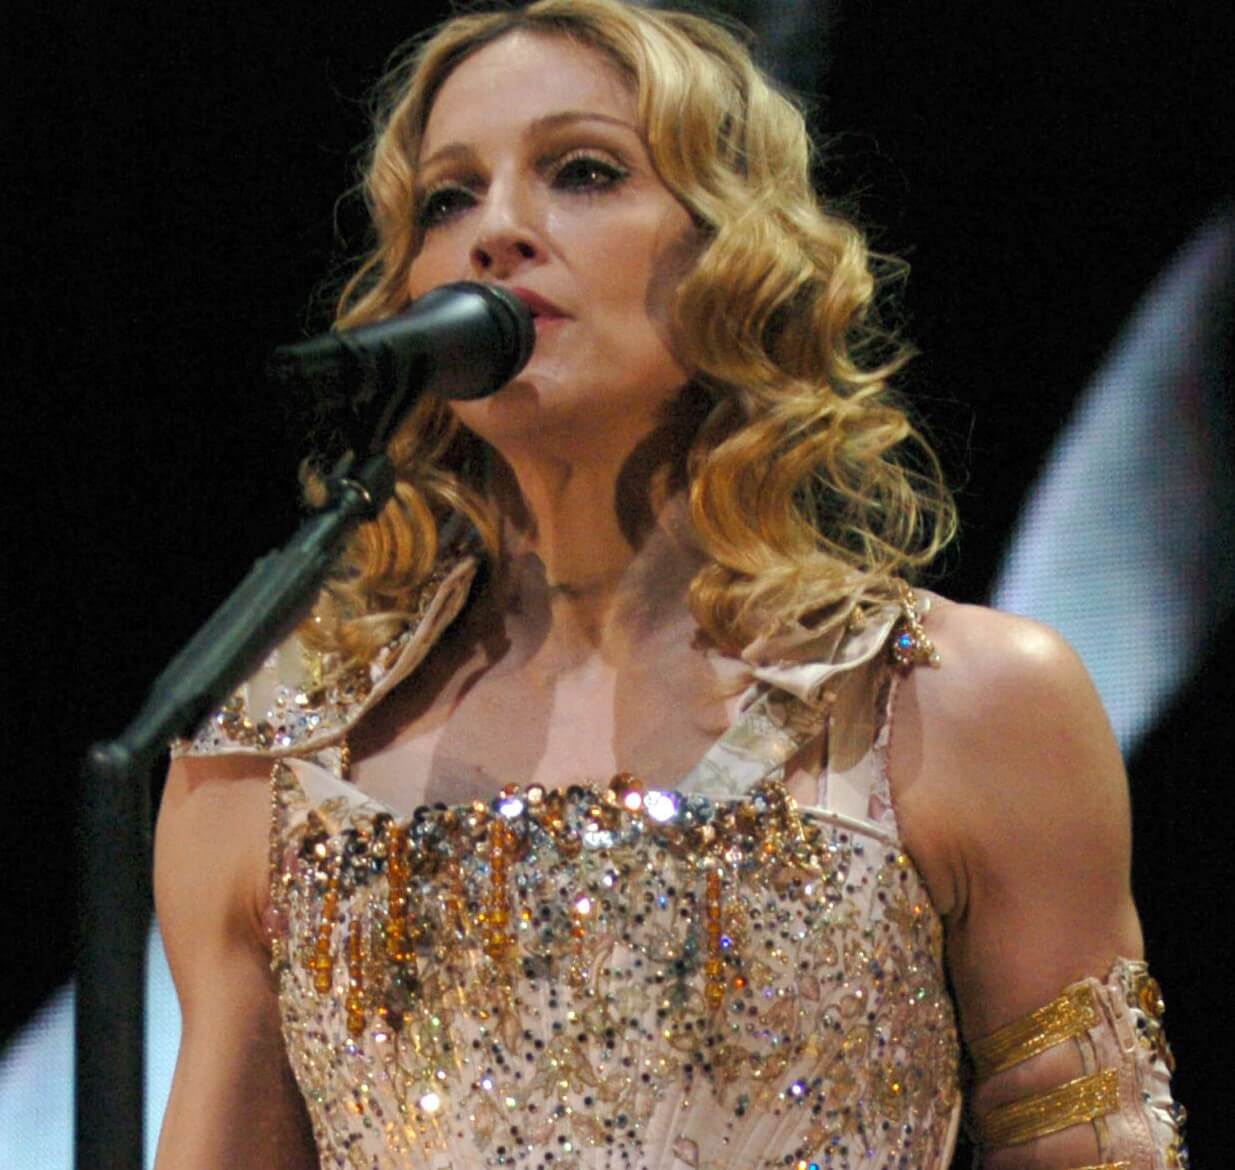 "Frozen" singer Madonna at the microphone